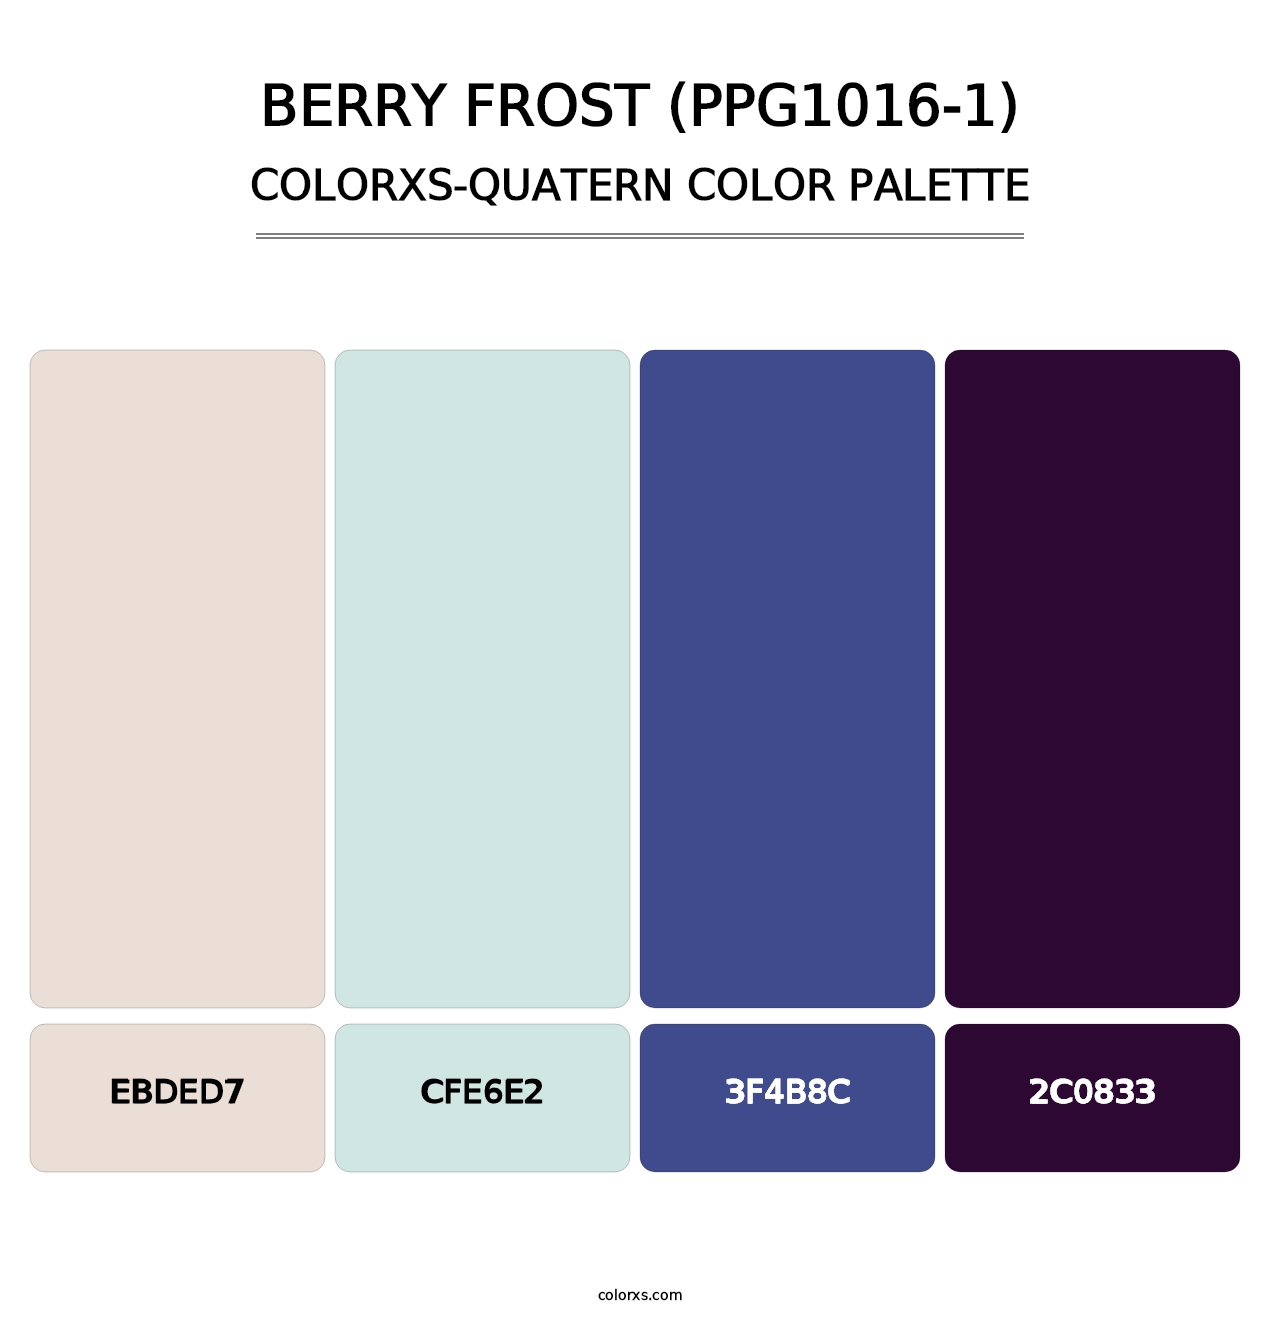 Berry Frost (PPG1016-1) - Colorxs Quatern Palette